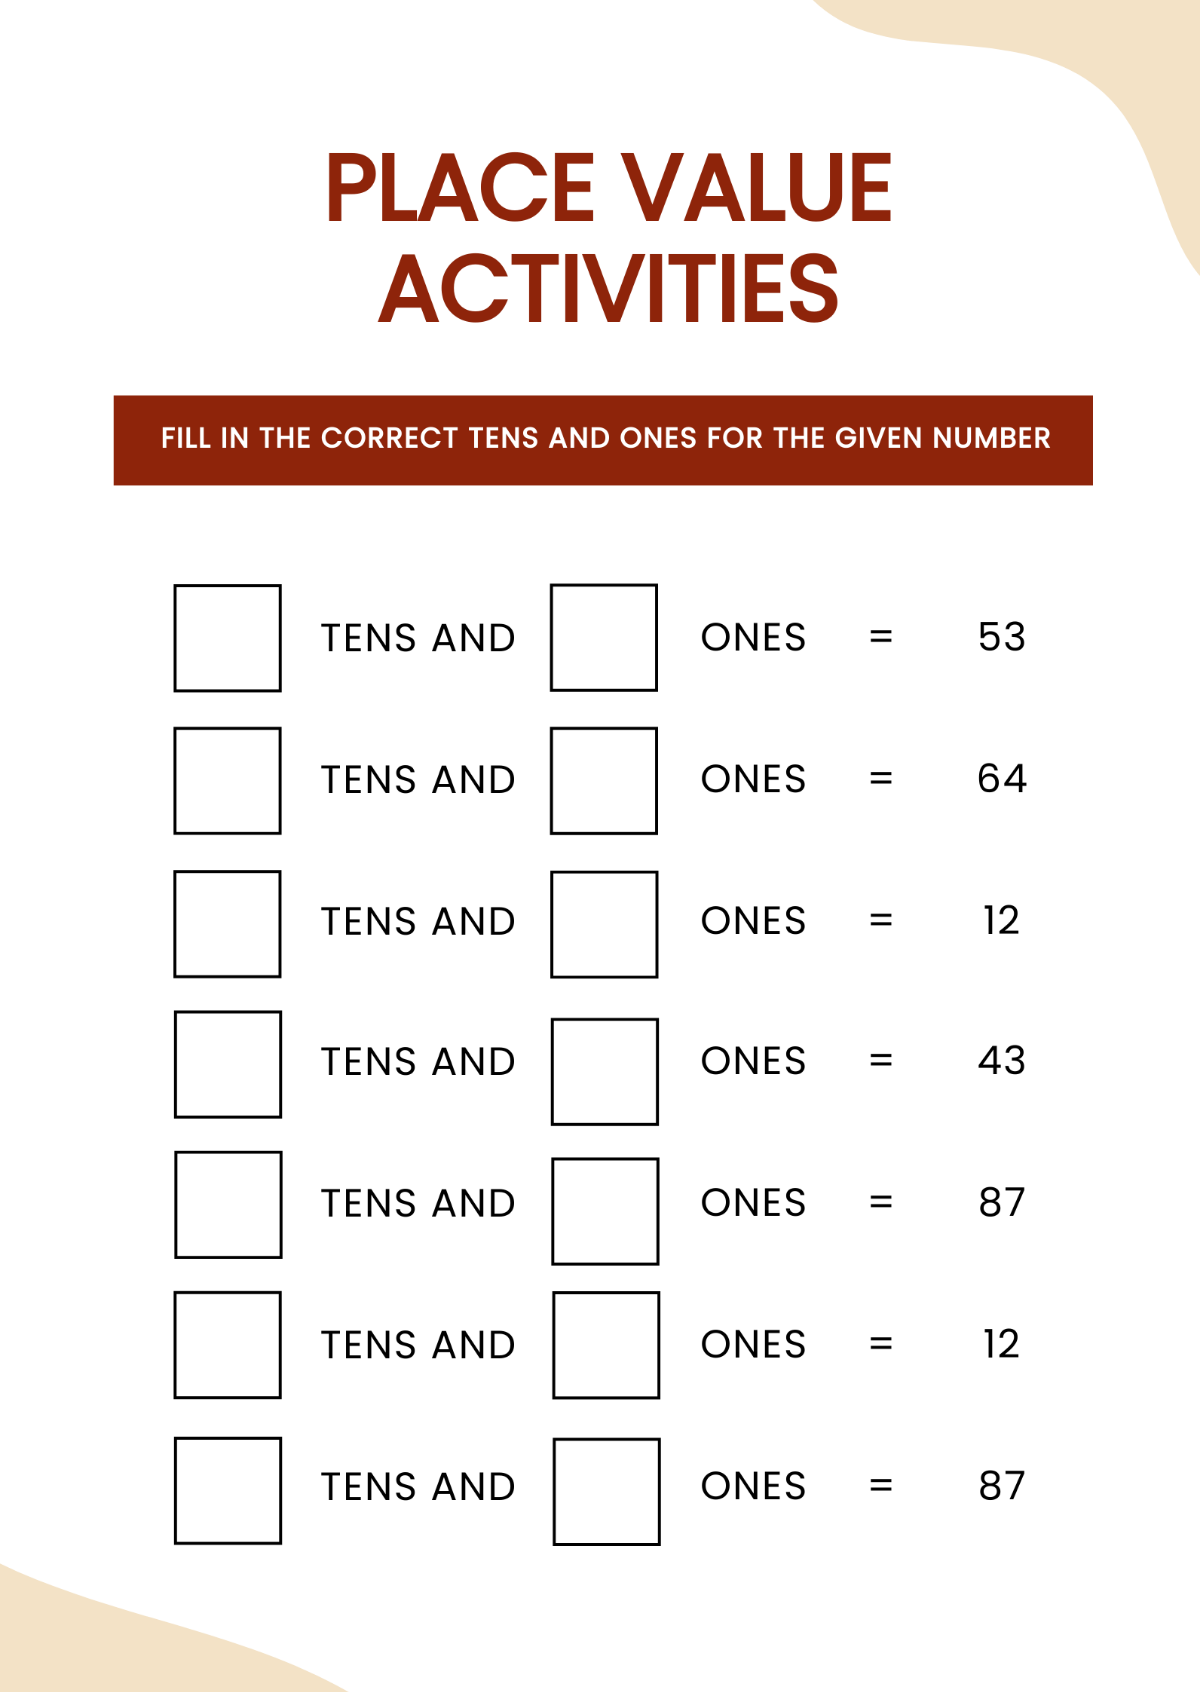 Place Value Activities Chart Template